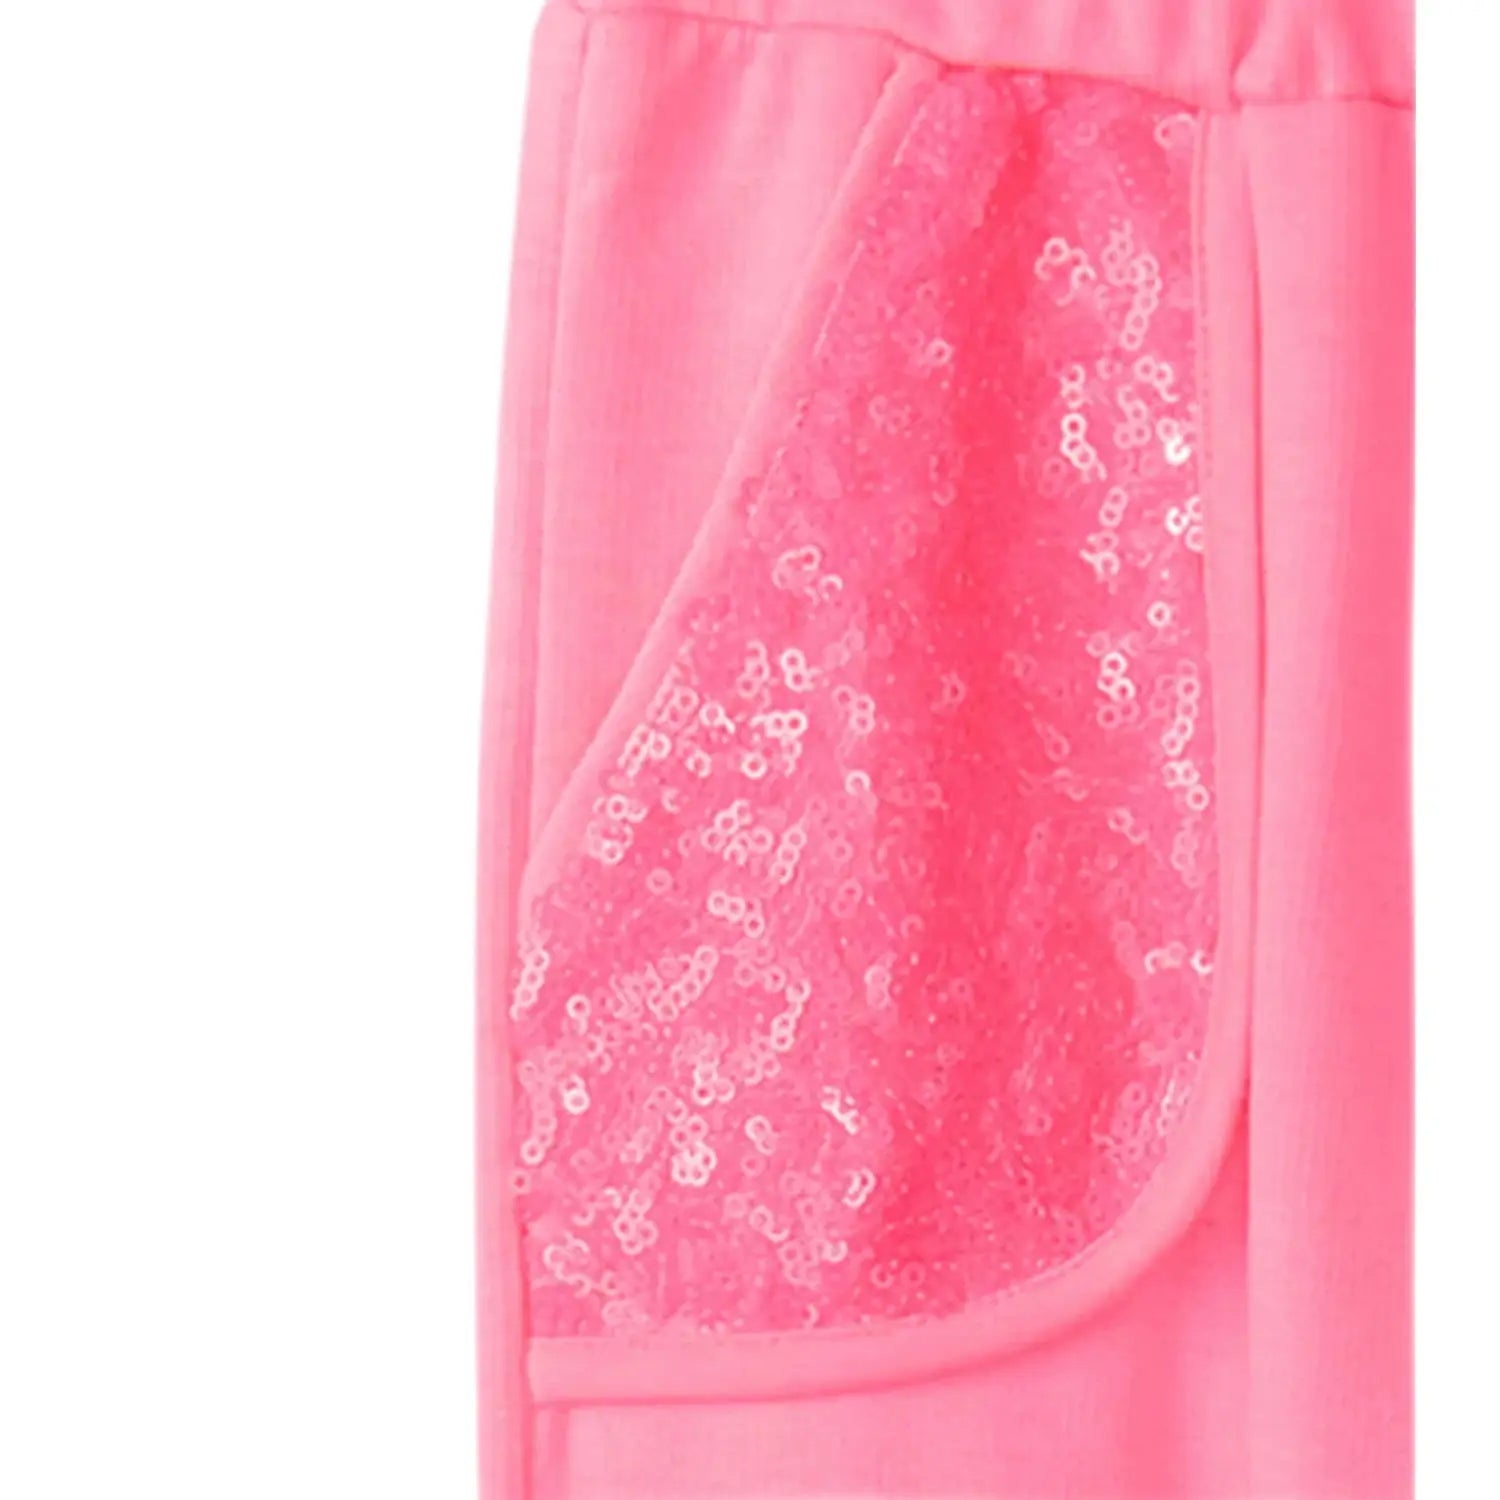 Hatley Girl's Pink Neon Track Pants. Front pocket view.